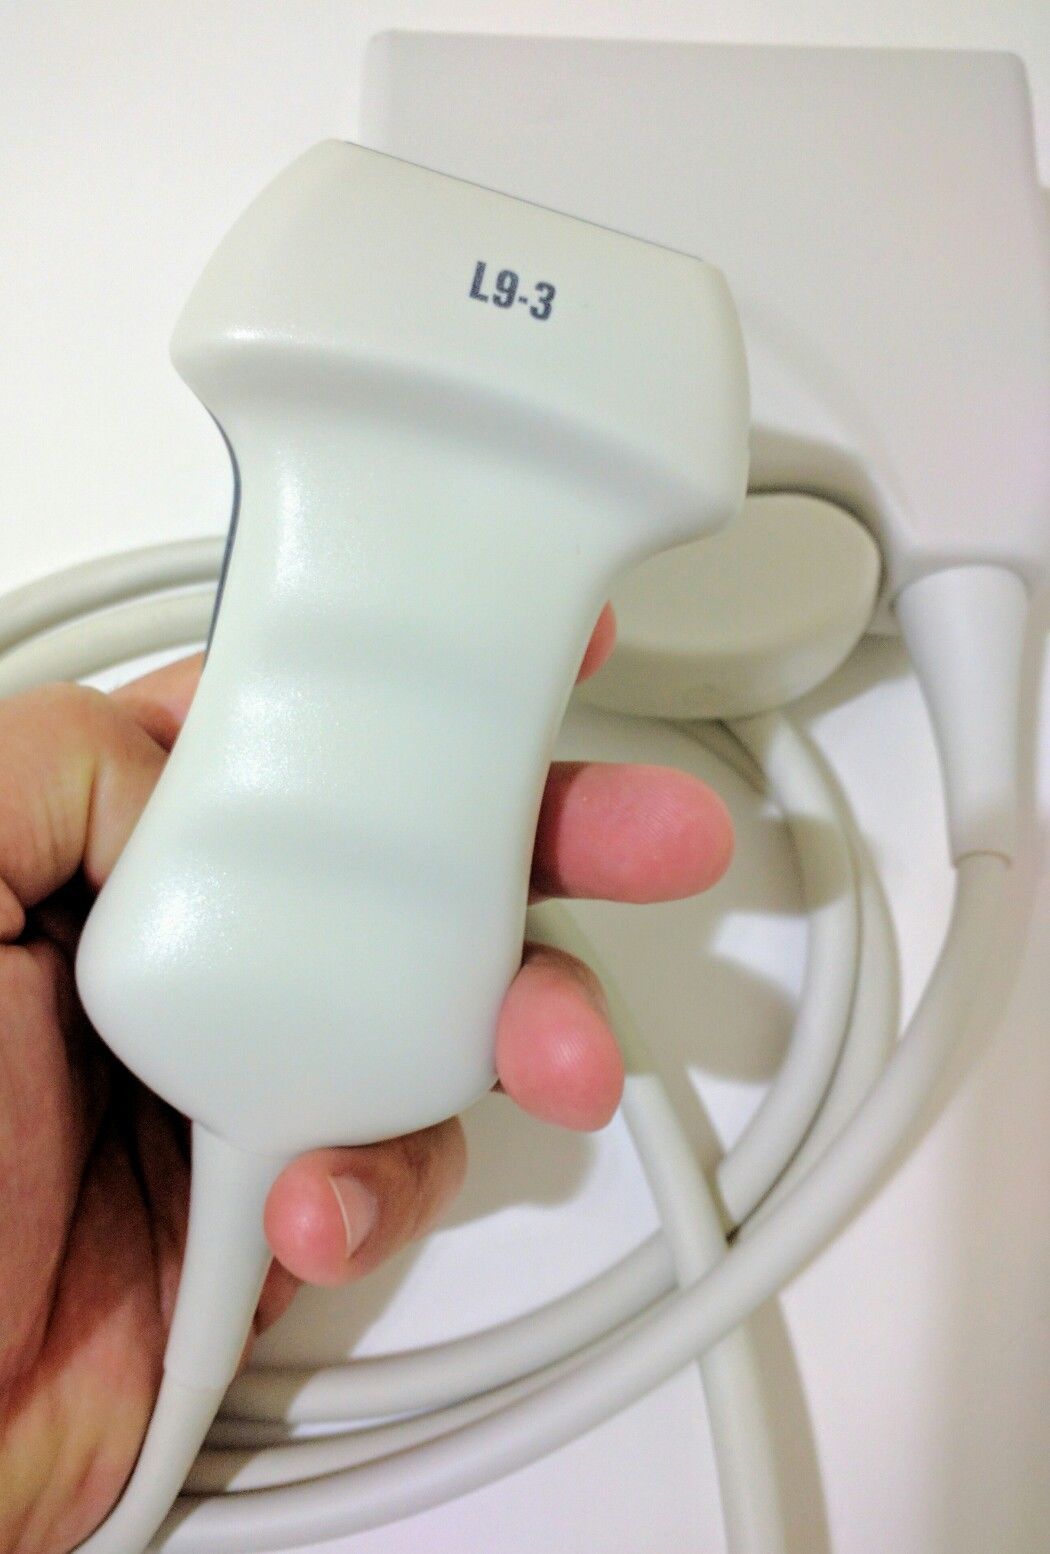 PHILIPS L9-3 LINEAR PROBE TRANSDUCER DIAGNOSTIC ULTRASOUND MACHINES FOR SALE